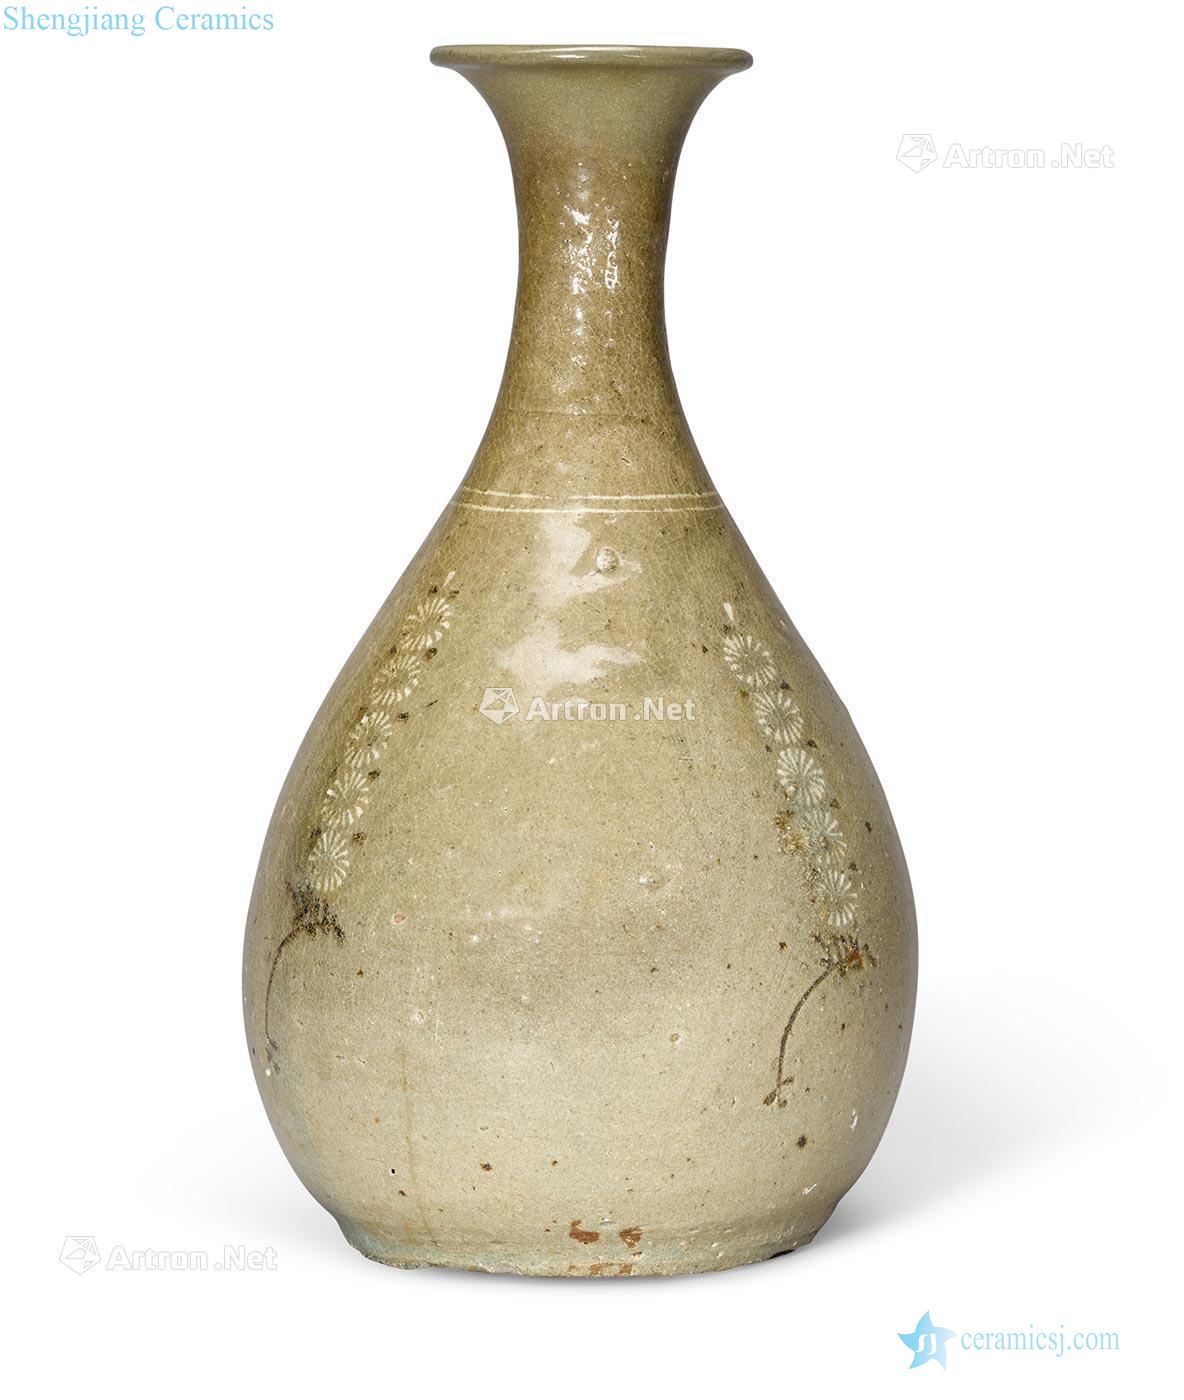 Goryeo dynasty, 13 th/14 th century A CELADON GLAZED BOTTLE WITH BLACK AND WHITE INLAY